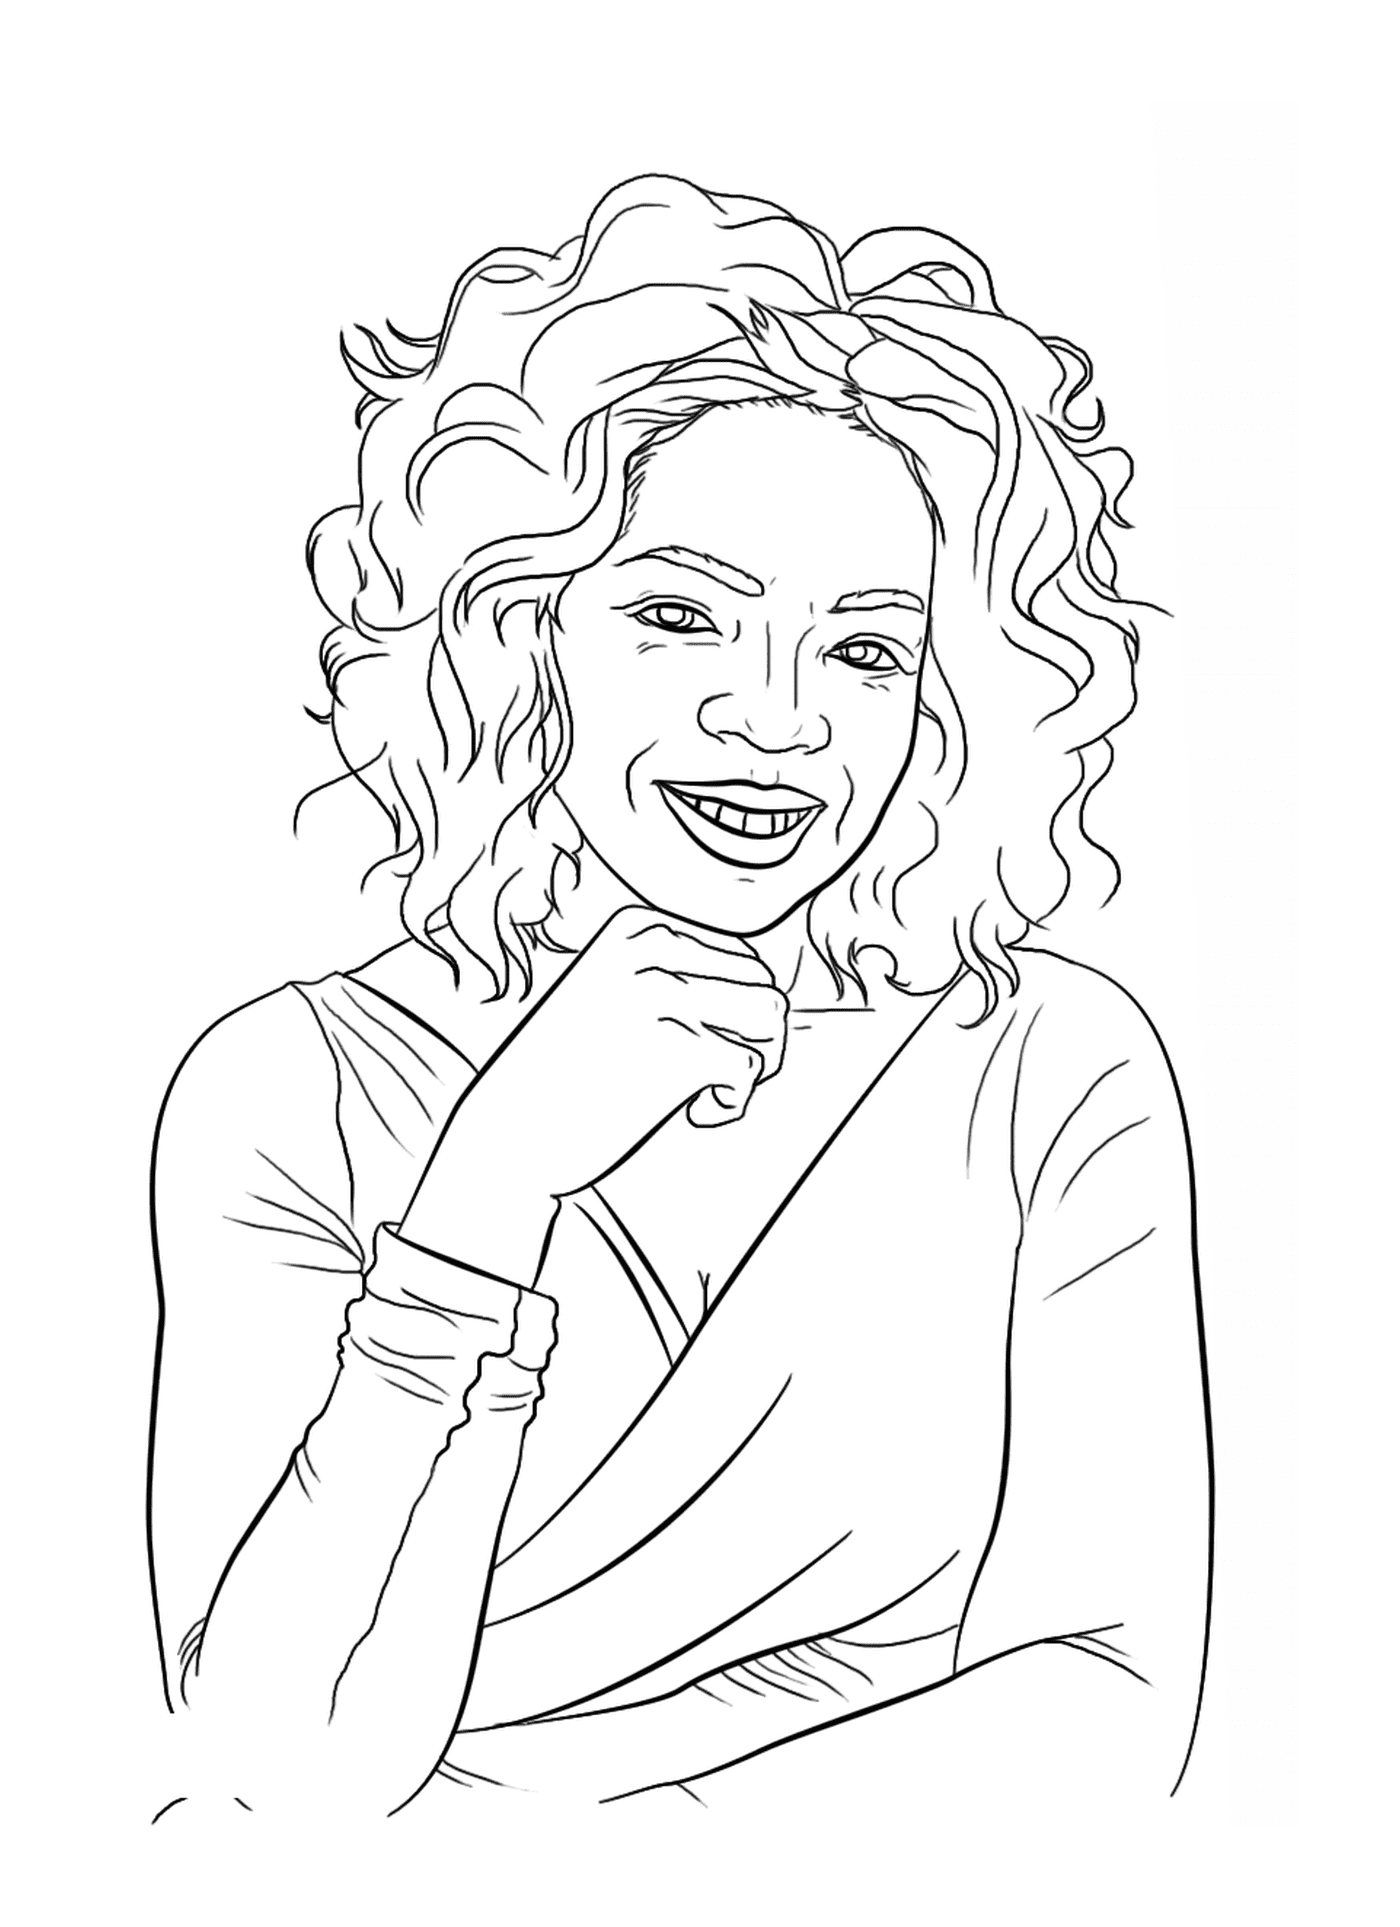  A smiling woman 